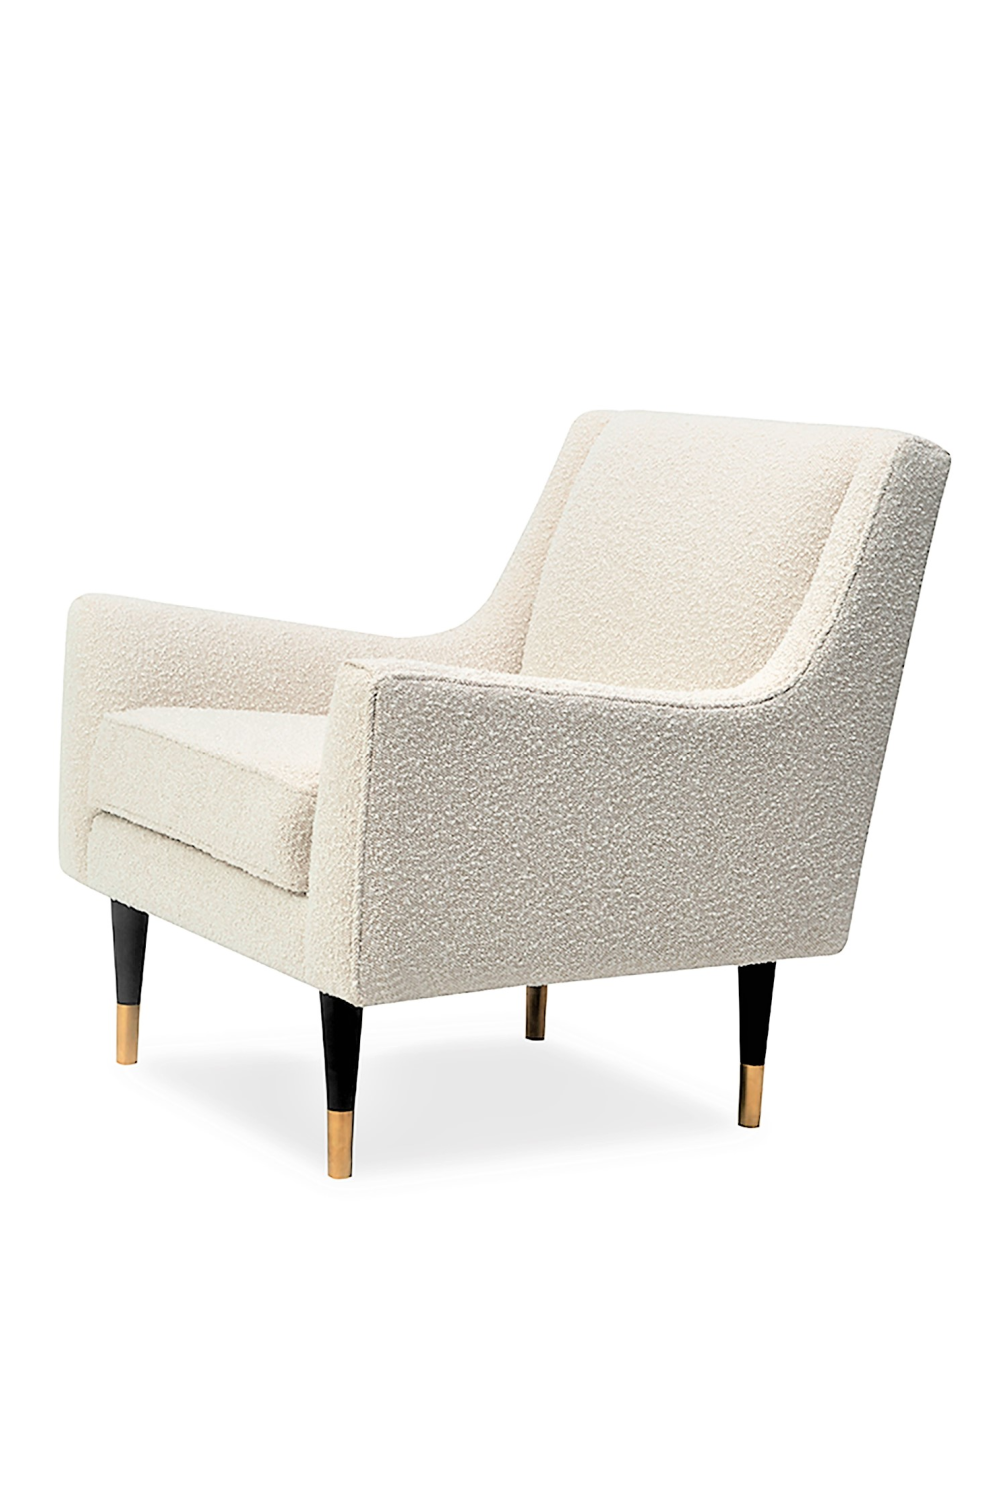 Upholstered Modern Lounge Chair | Liang & Eimil Conte | OROA.com